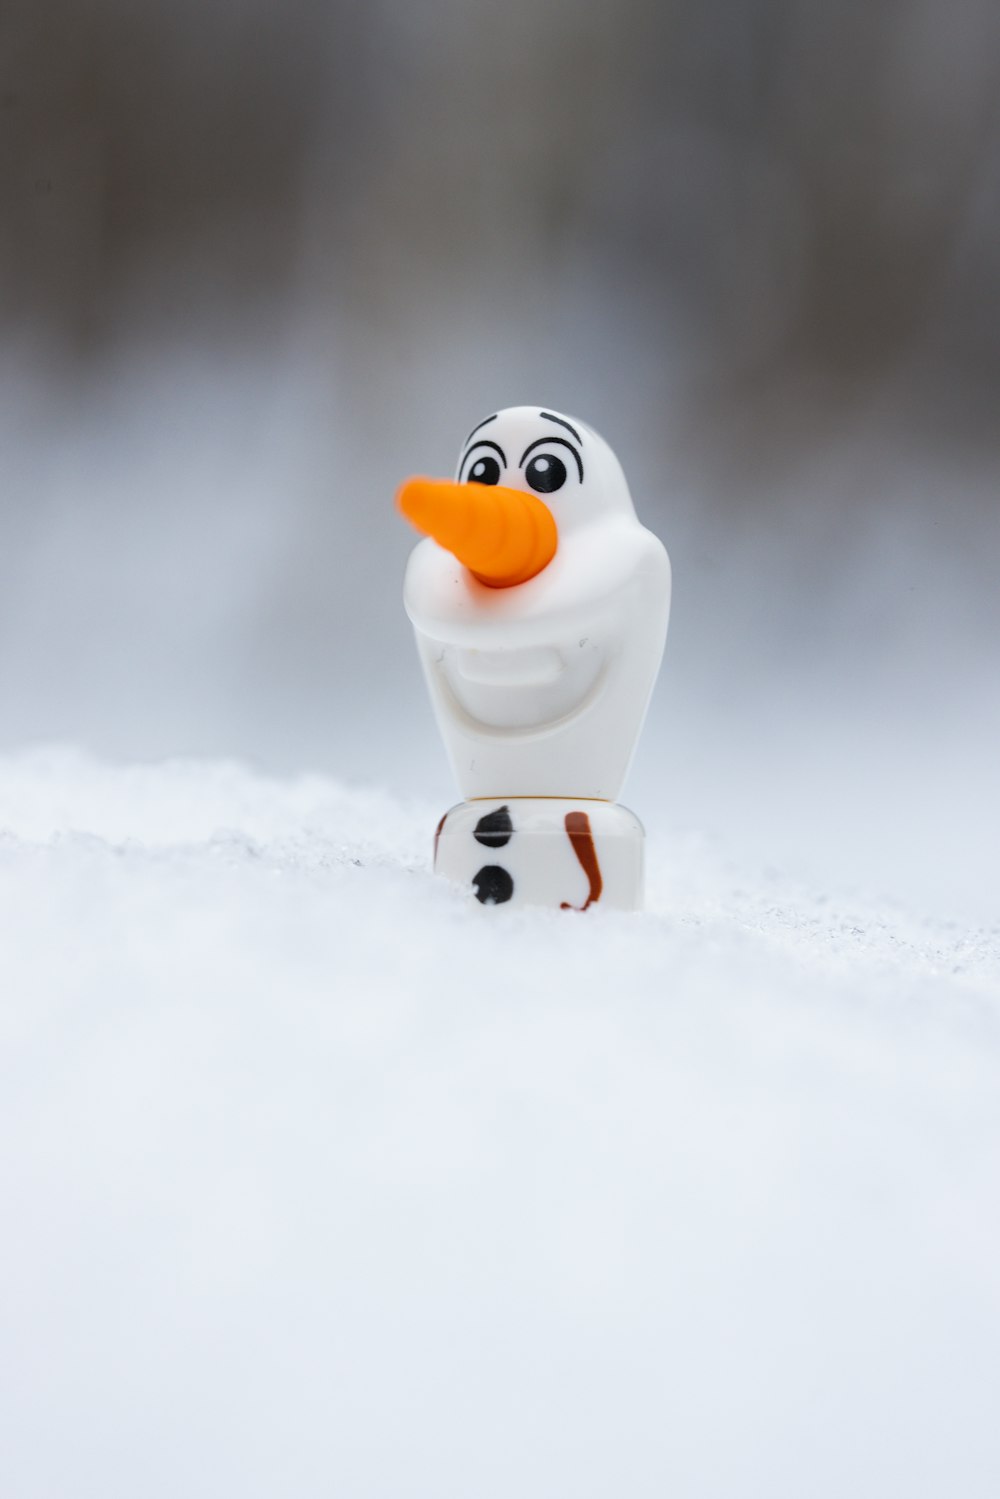 a toy snowman with an orange nose standing in the snow